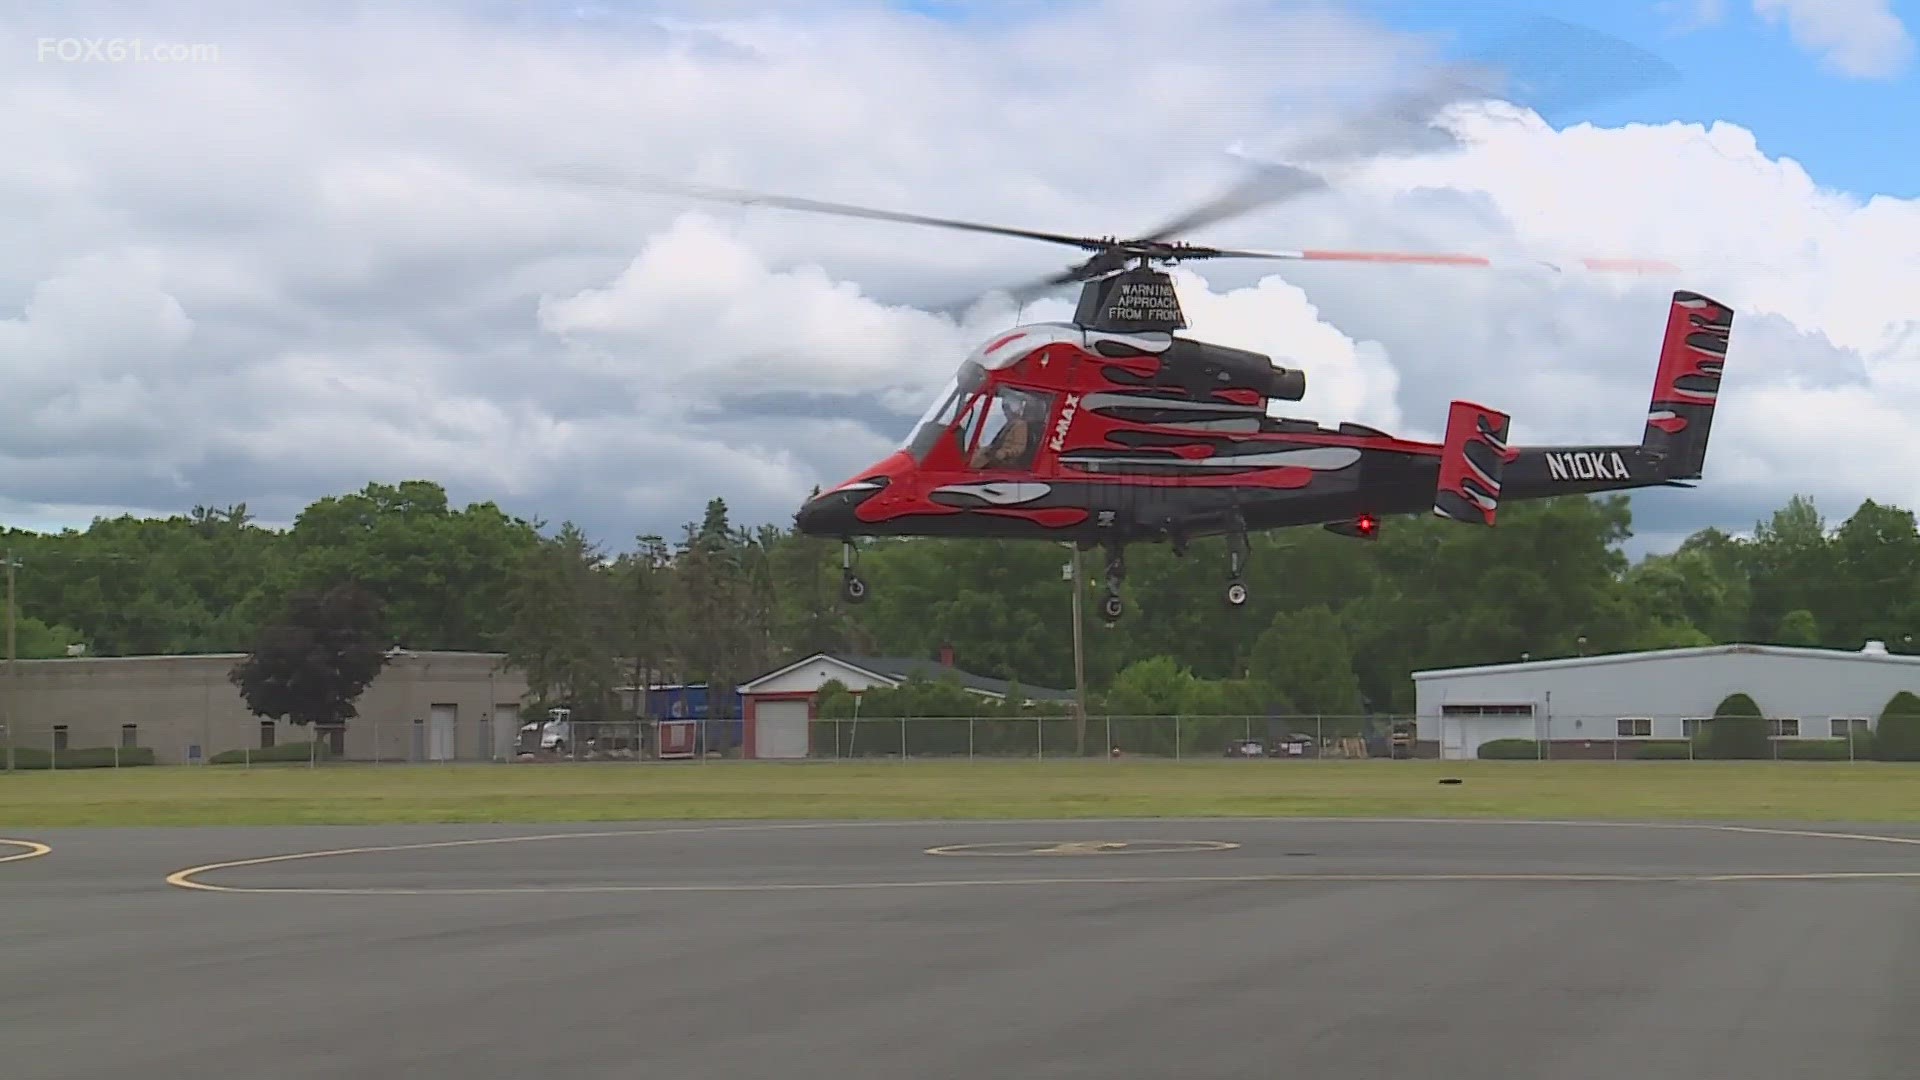 Built in Bloomfield and battling wildfires well beyond; the specialized helicopter known as the “K-Max” is currently fighting the Canadian wildfires.